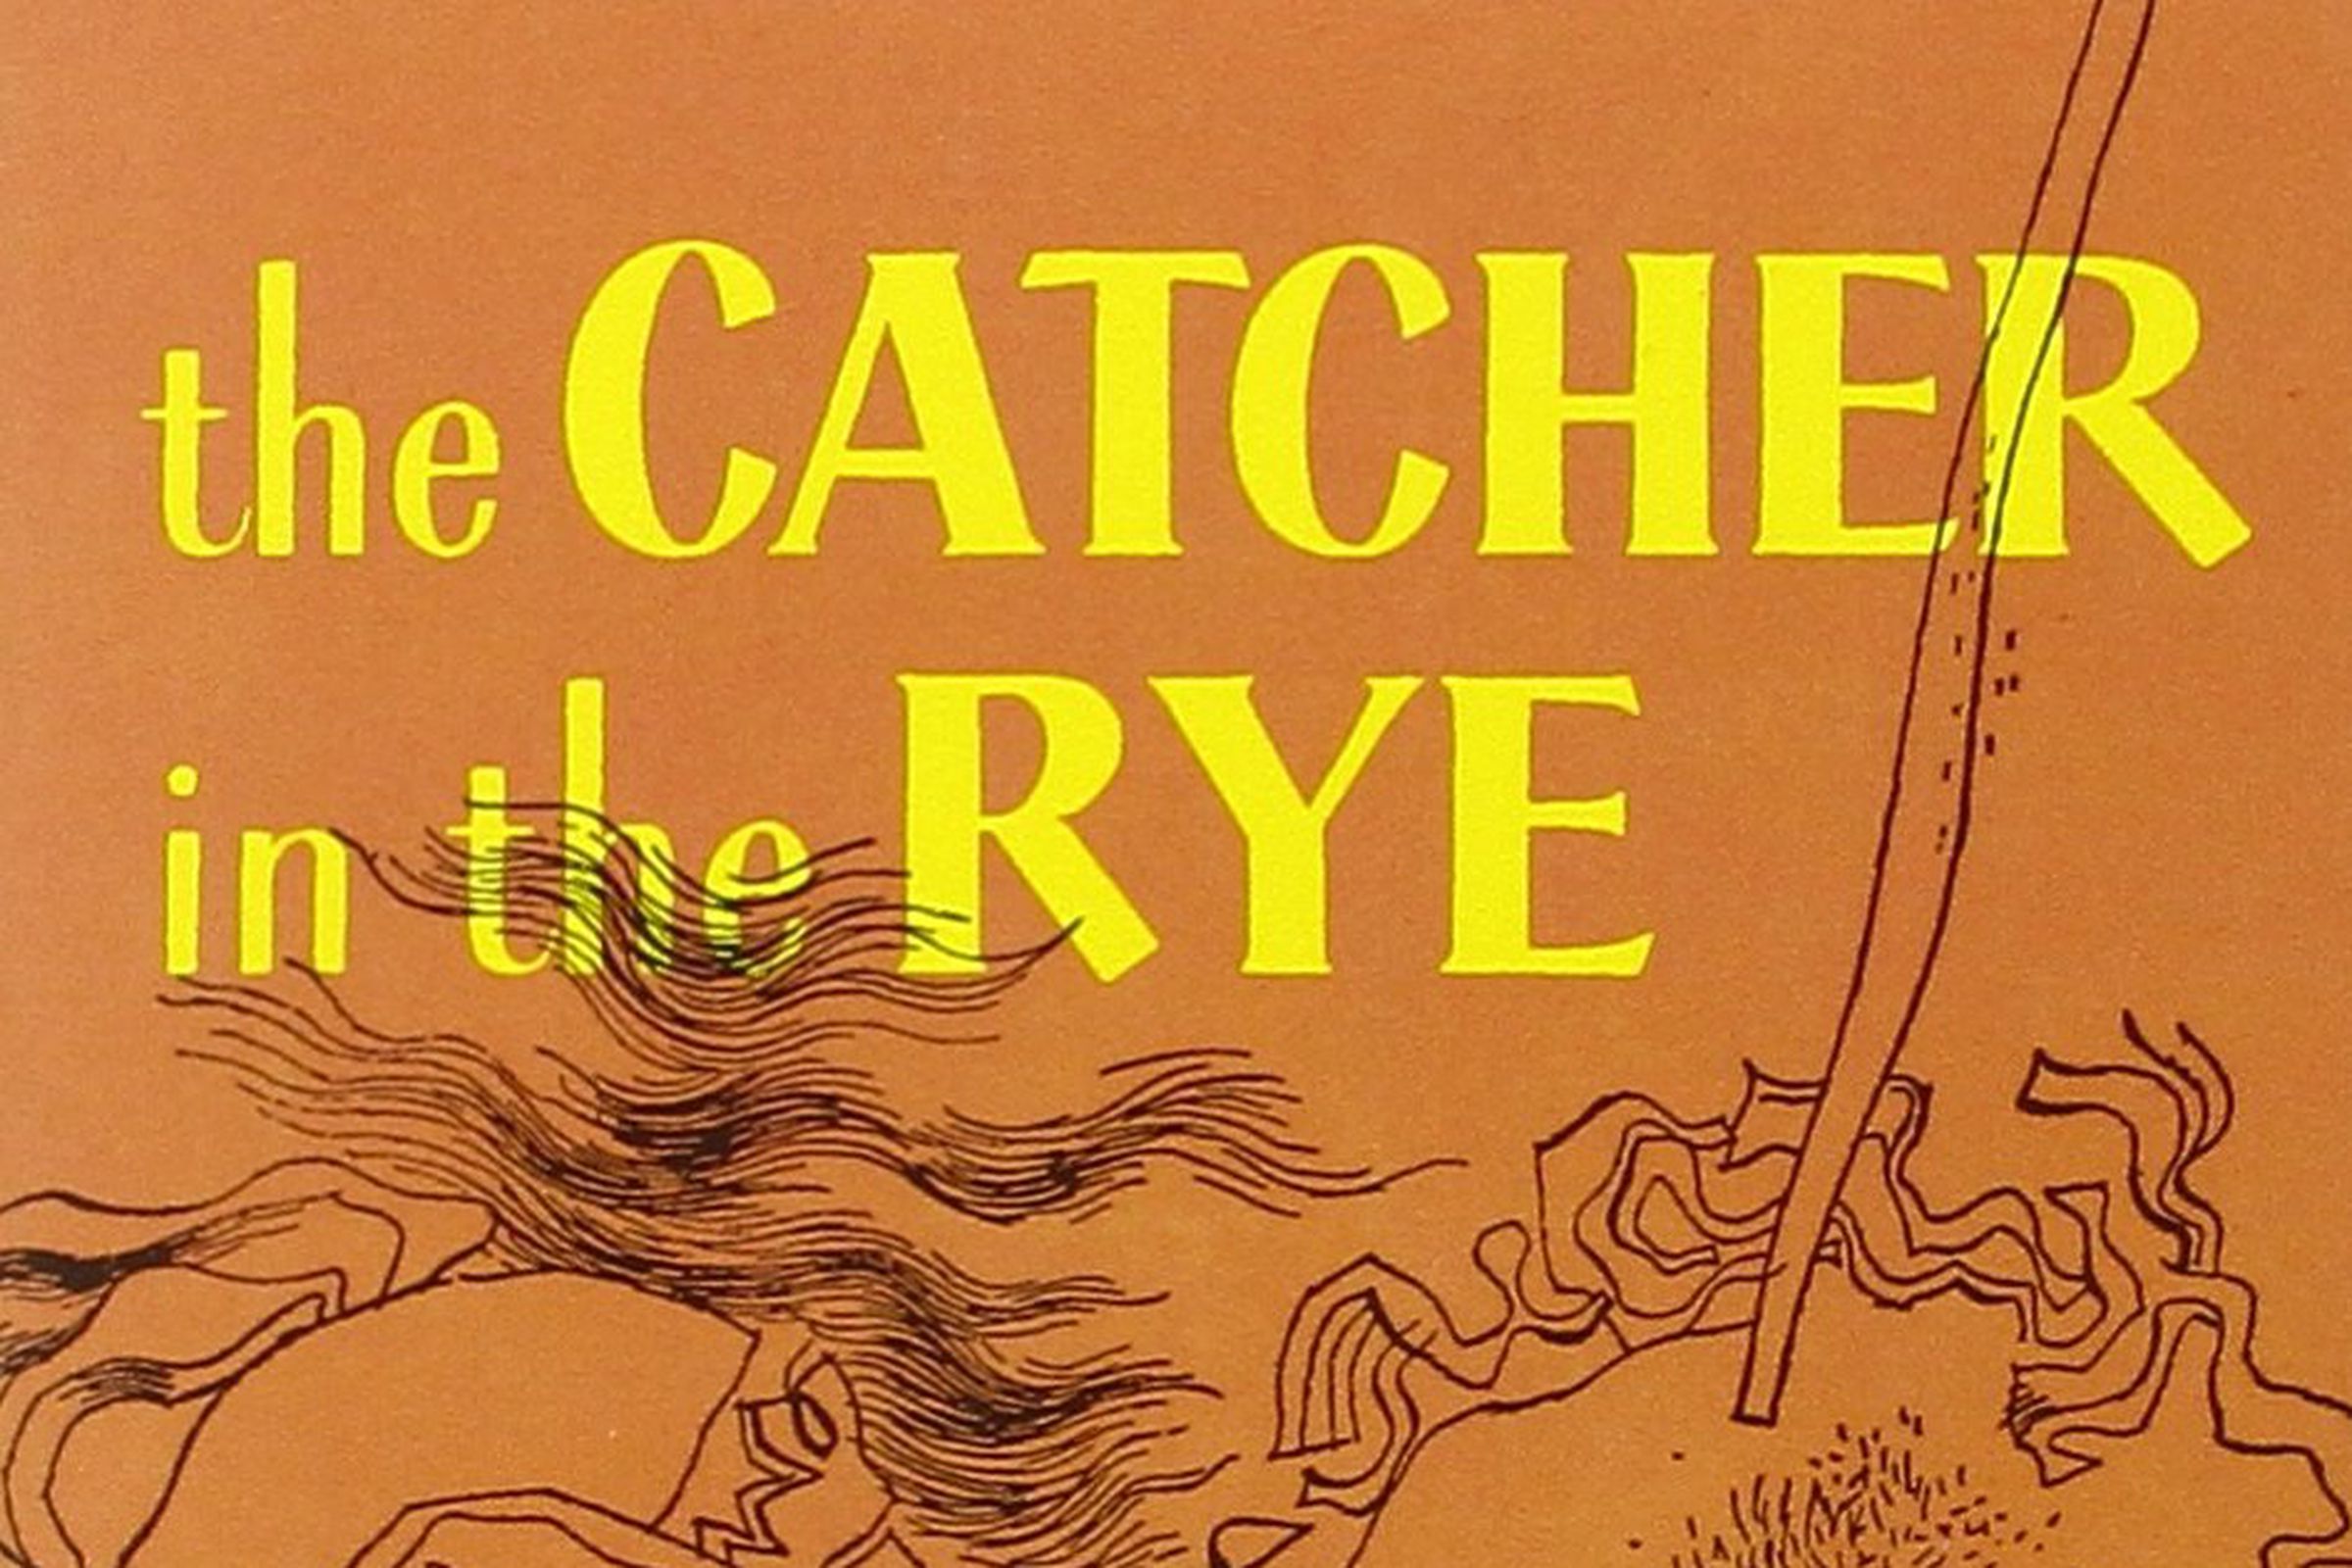 The road in the rye. Сэлинджер the Catcher in the Rye. Jerome Salinger the Catcher in the Rye. The Catcher in the Rye by j.d. Salinger. Catcher in the Rye обложка.